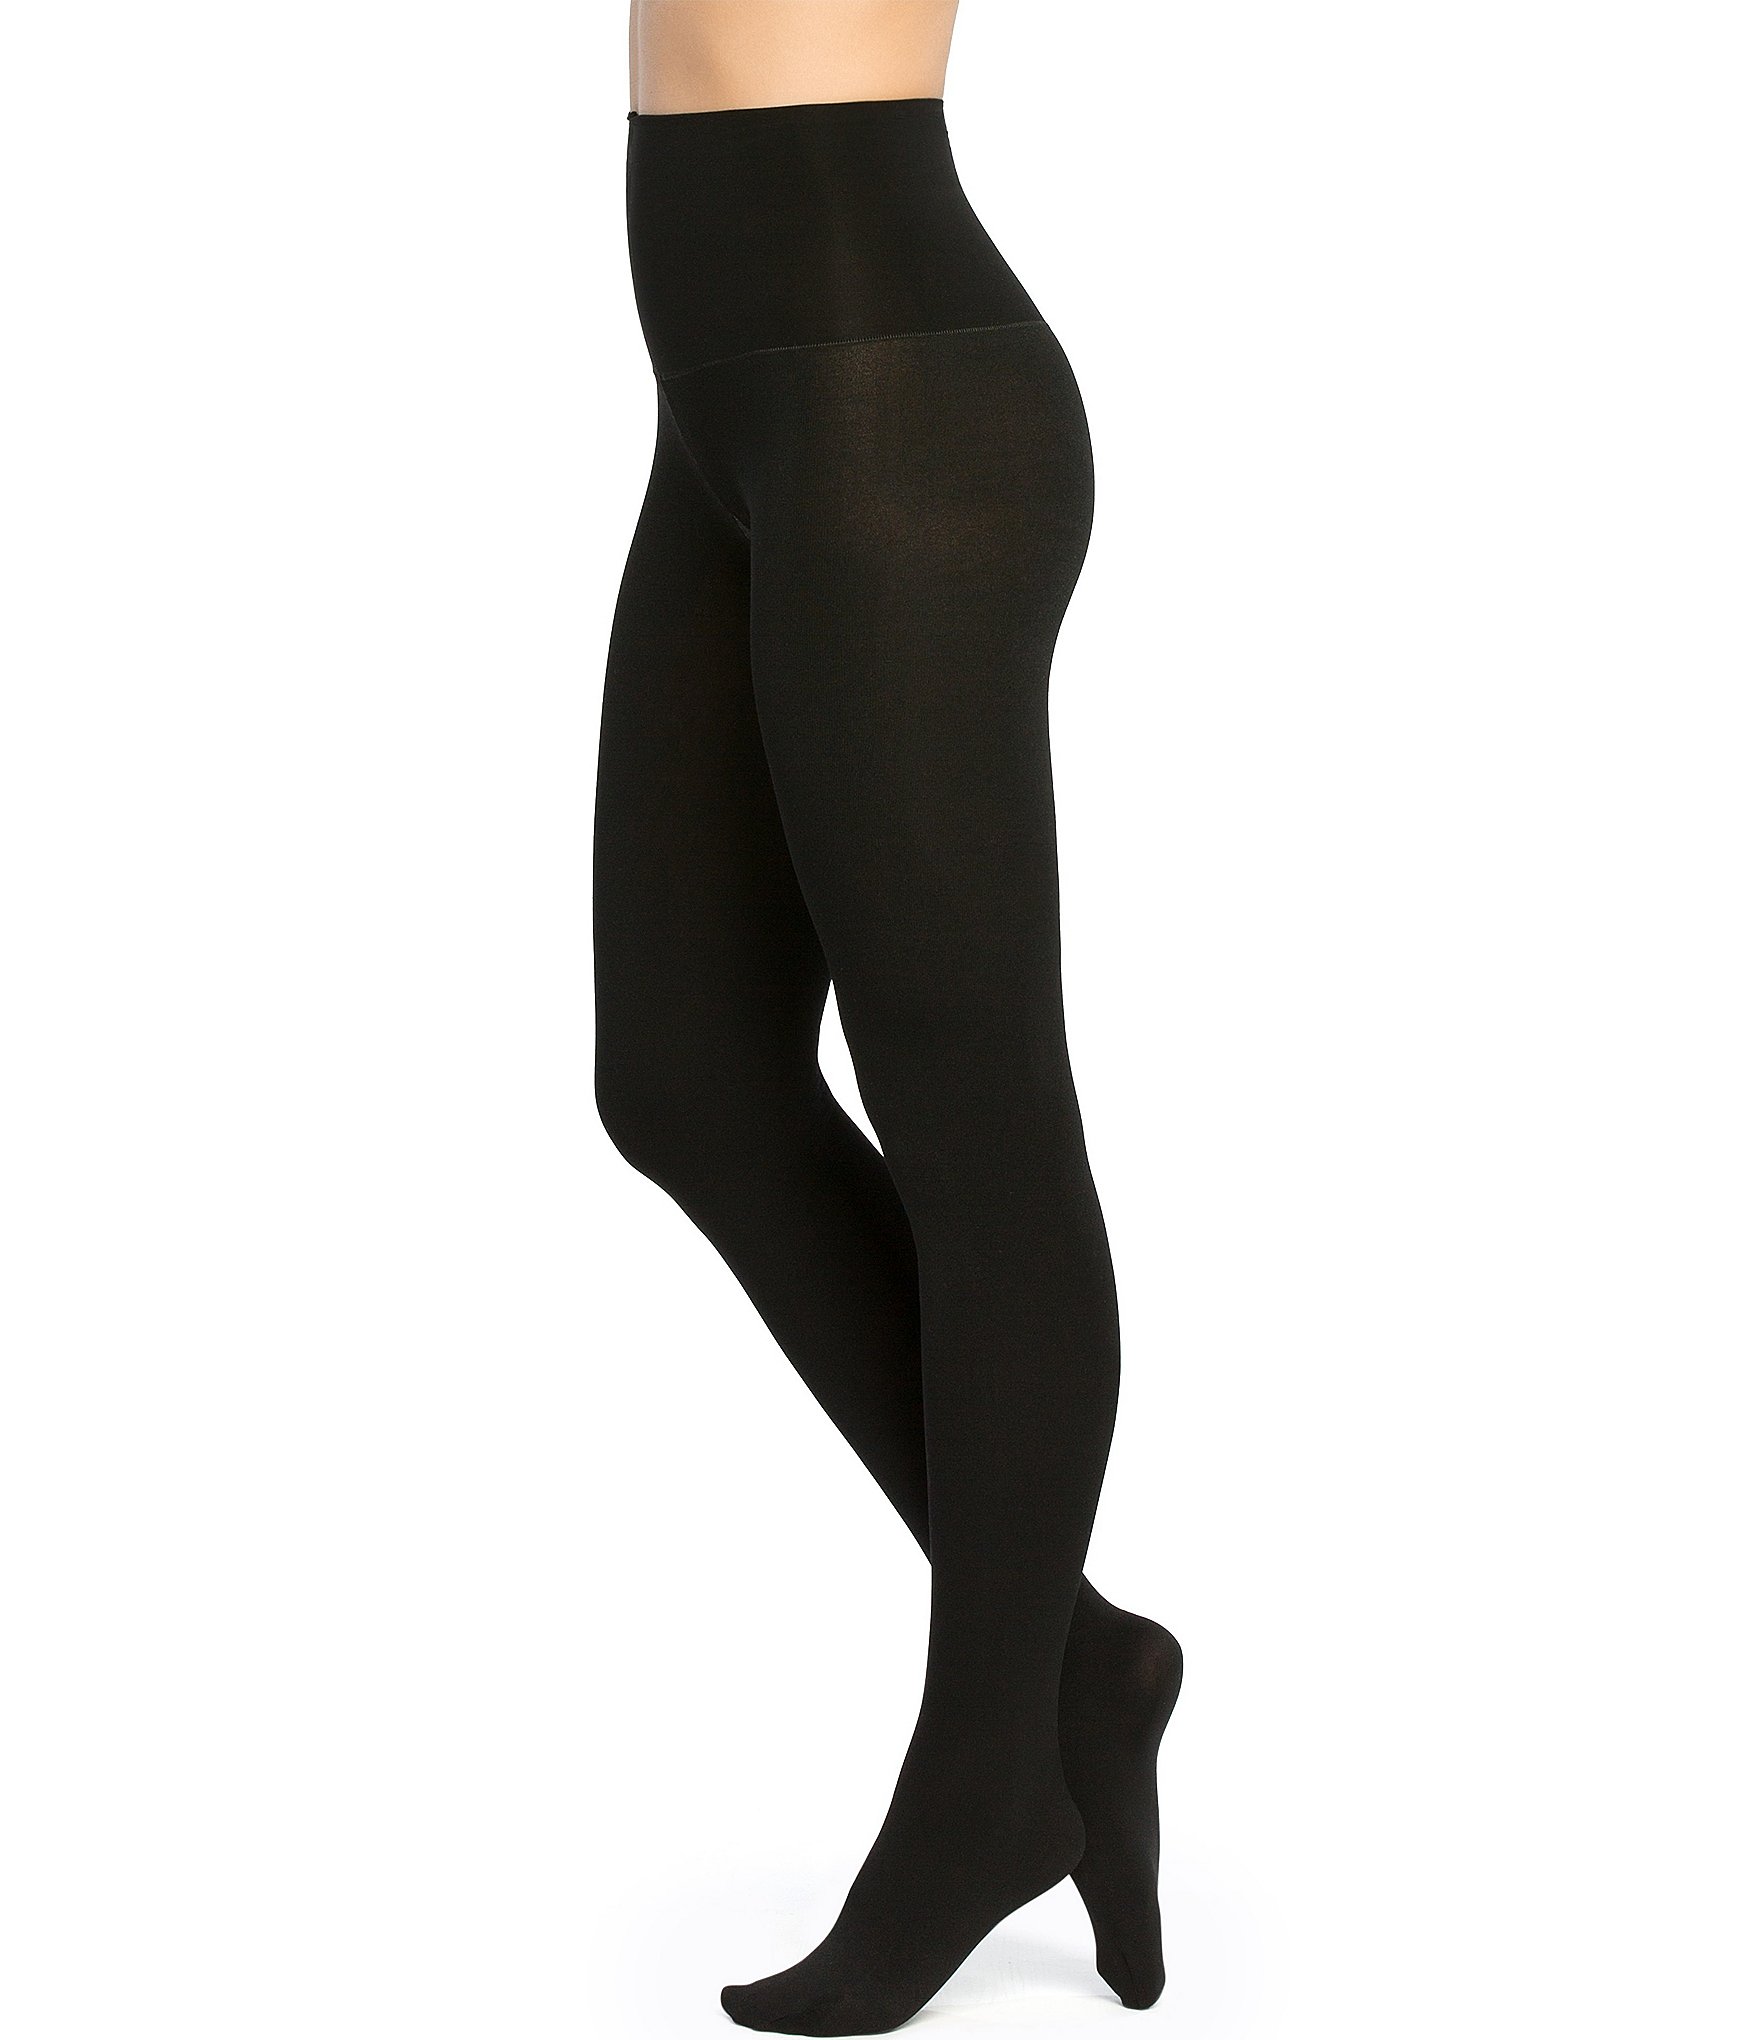 Every Woman Should Own A Pair Of These Tummy Slimming SPANX Tights